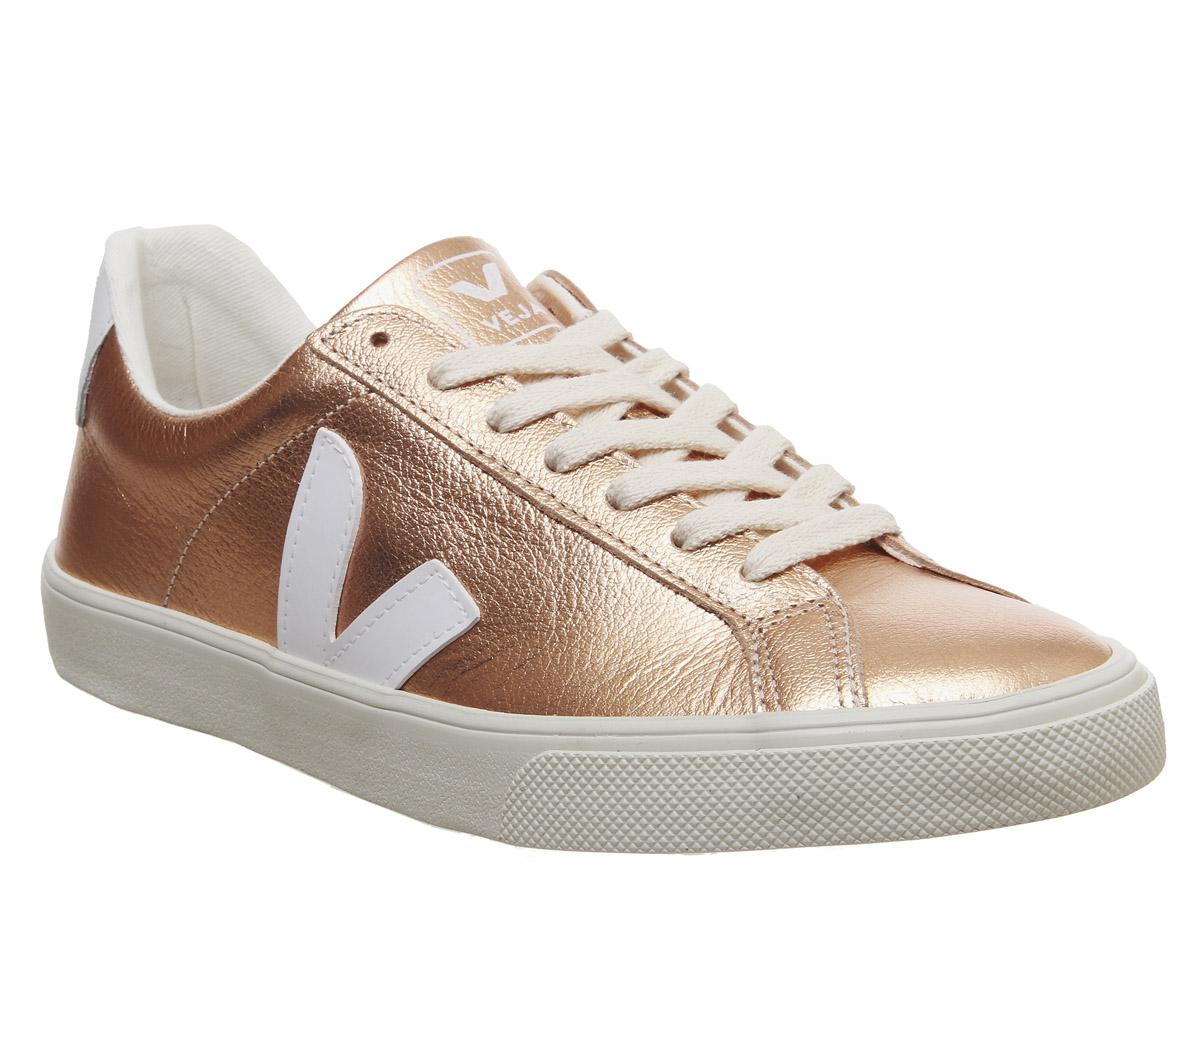 Veja Esplar Trainers Rose Gold White F - Hers trainers